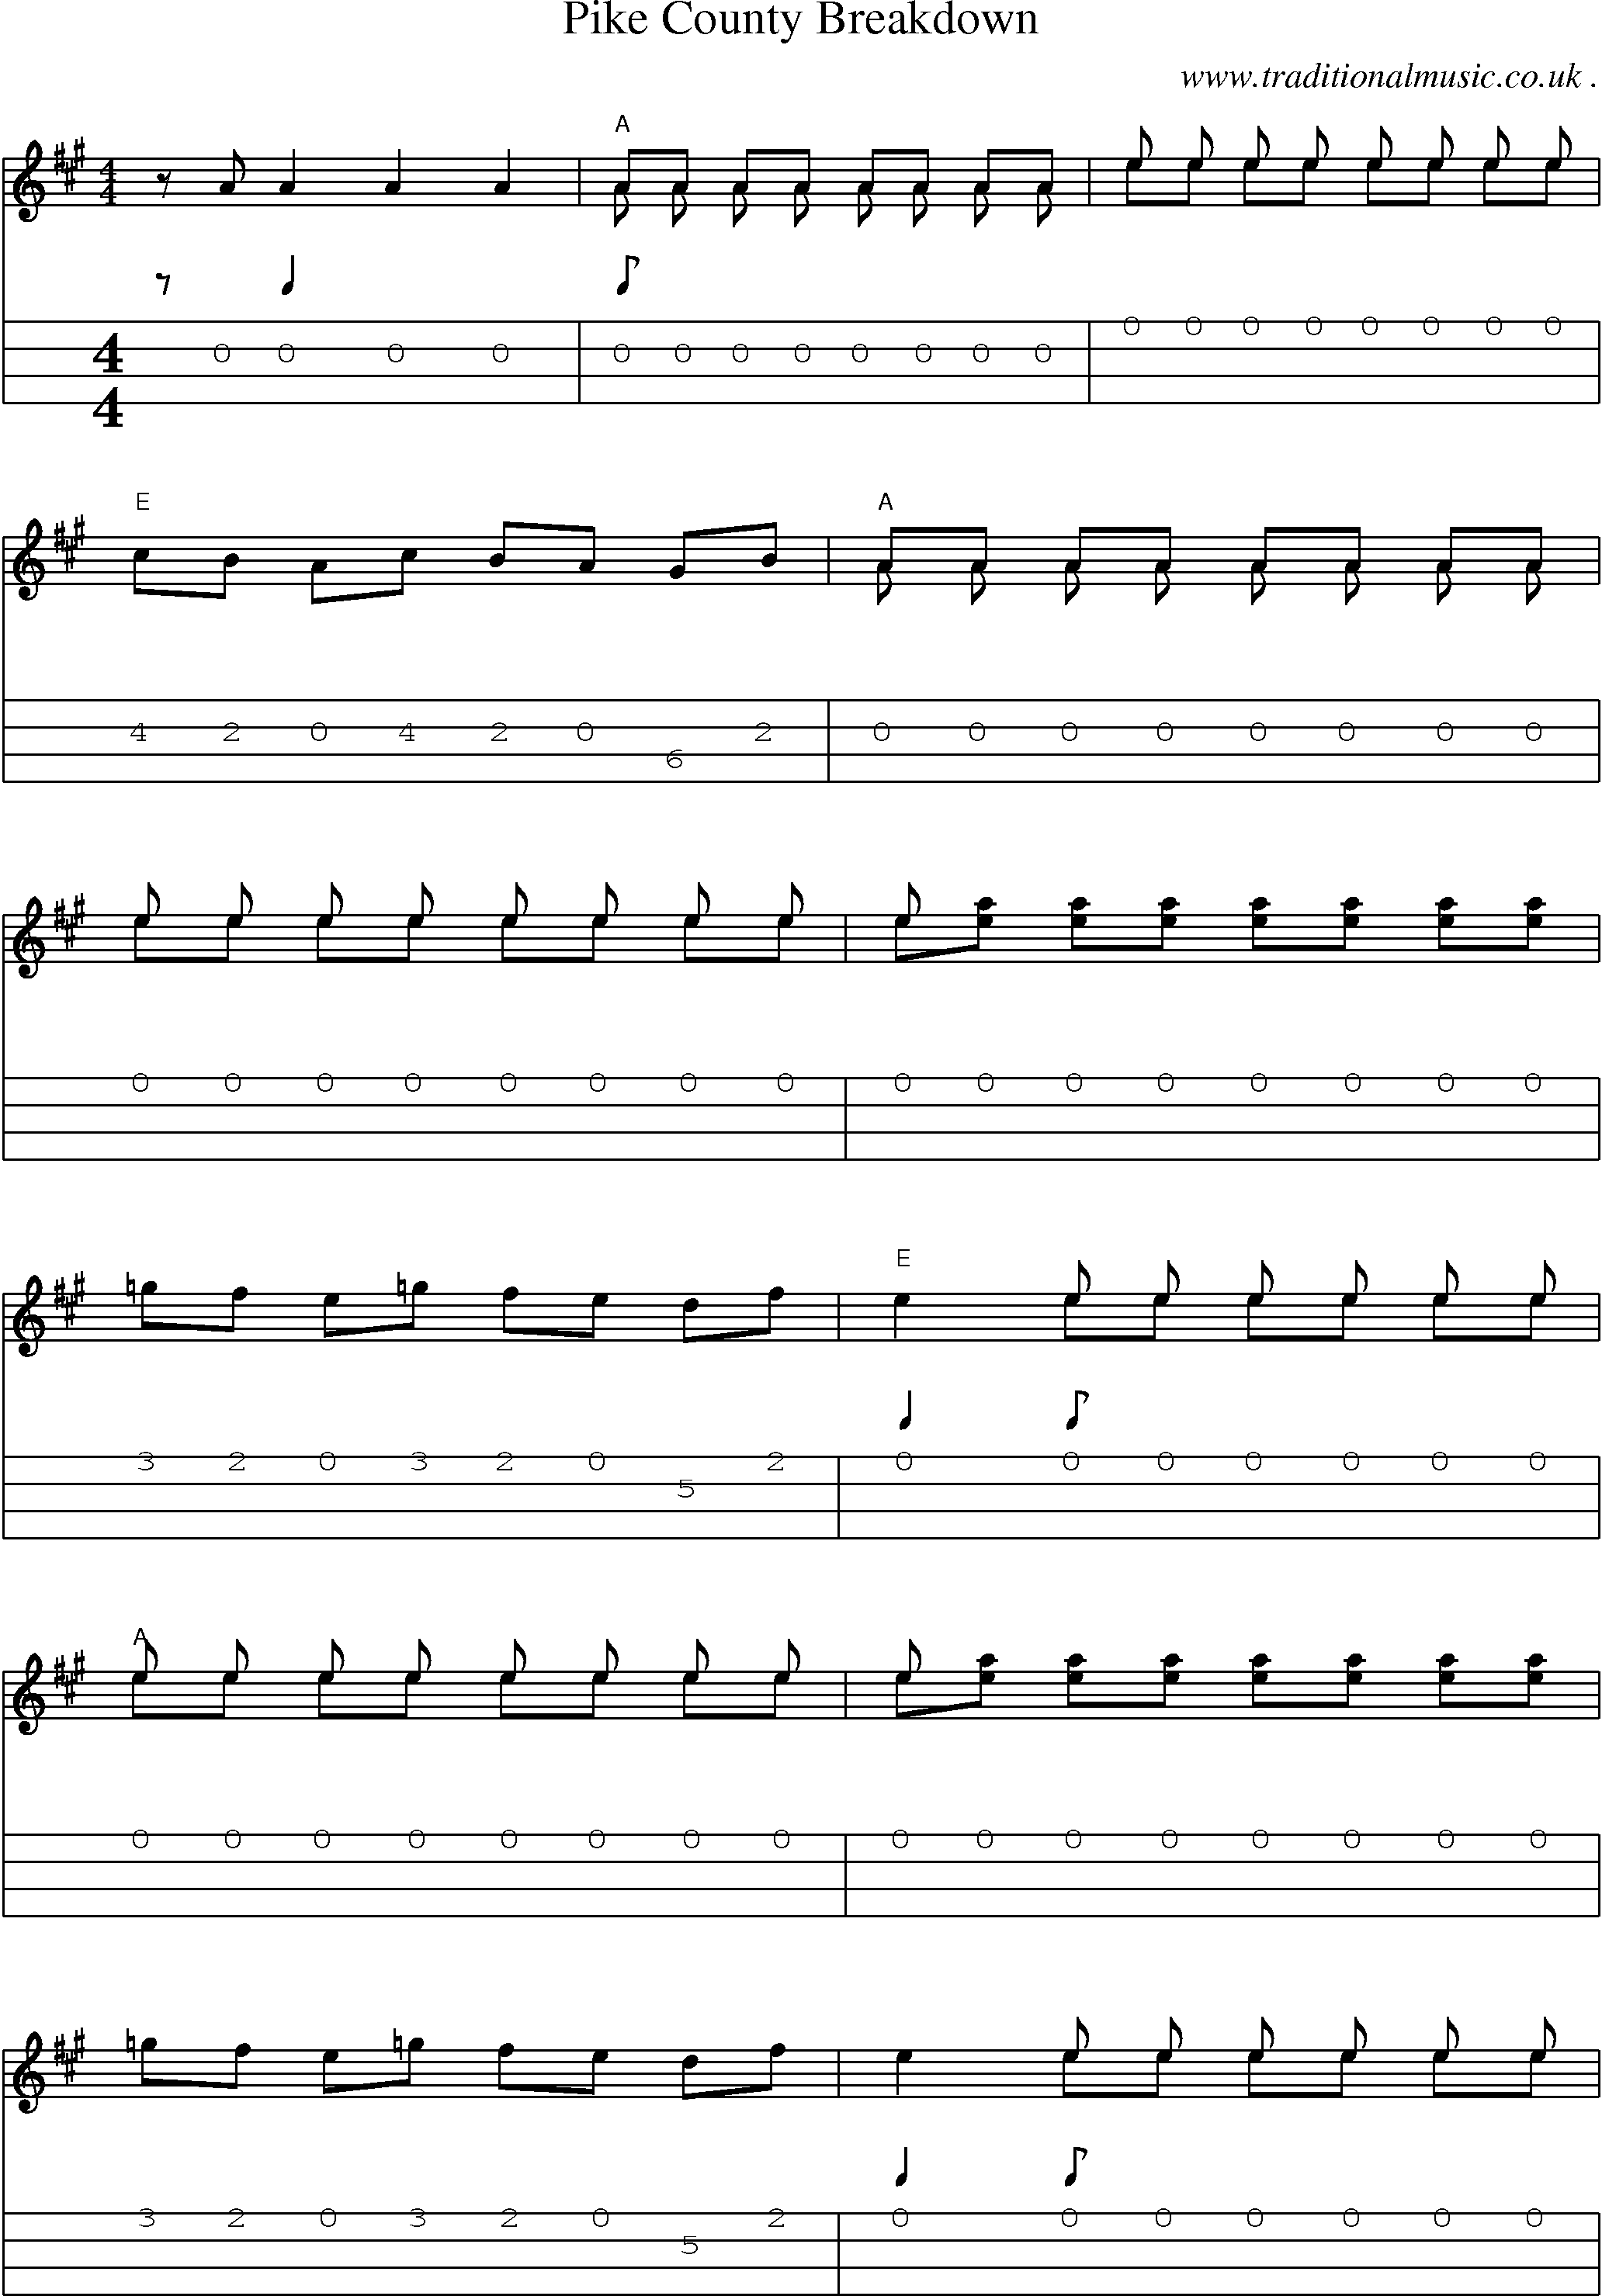 Music Score and Guitar Tabs for Pike County Breakdown